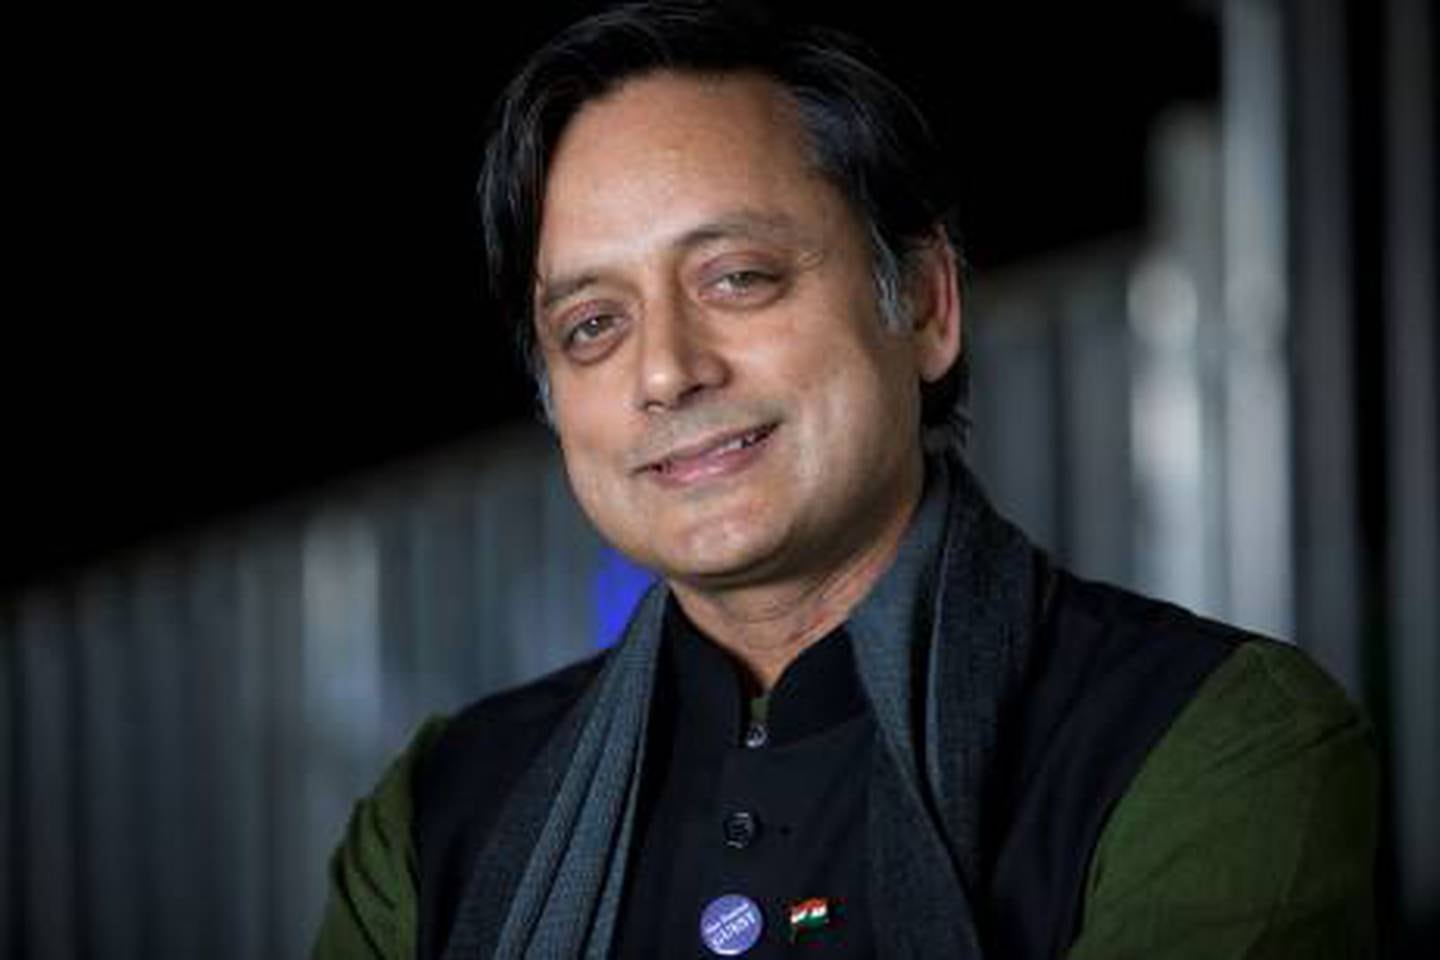 HAY-ON-WYE, UNITED KINGDOM - MAY 28: Indian politician and novelist Shashi Tharoor attends the Hay Festival on May 28, 2011 in Hay-on-Wye, Wales. (Photo by David Levenson/Getty Images)